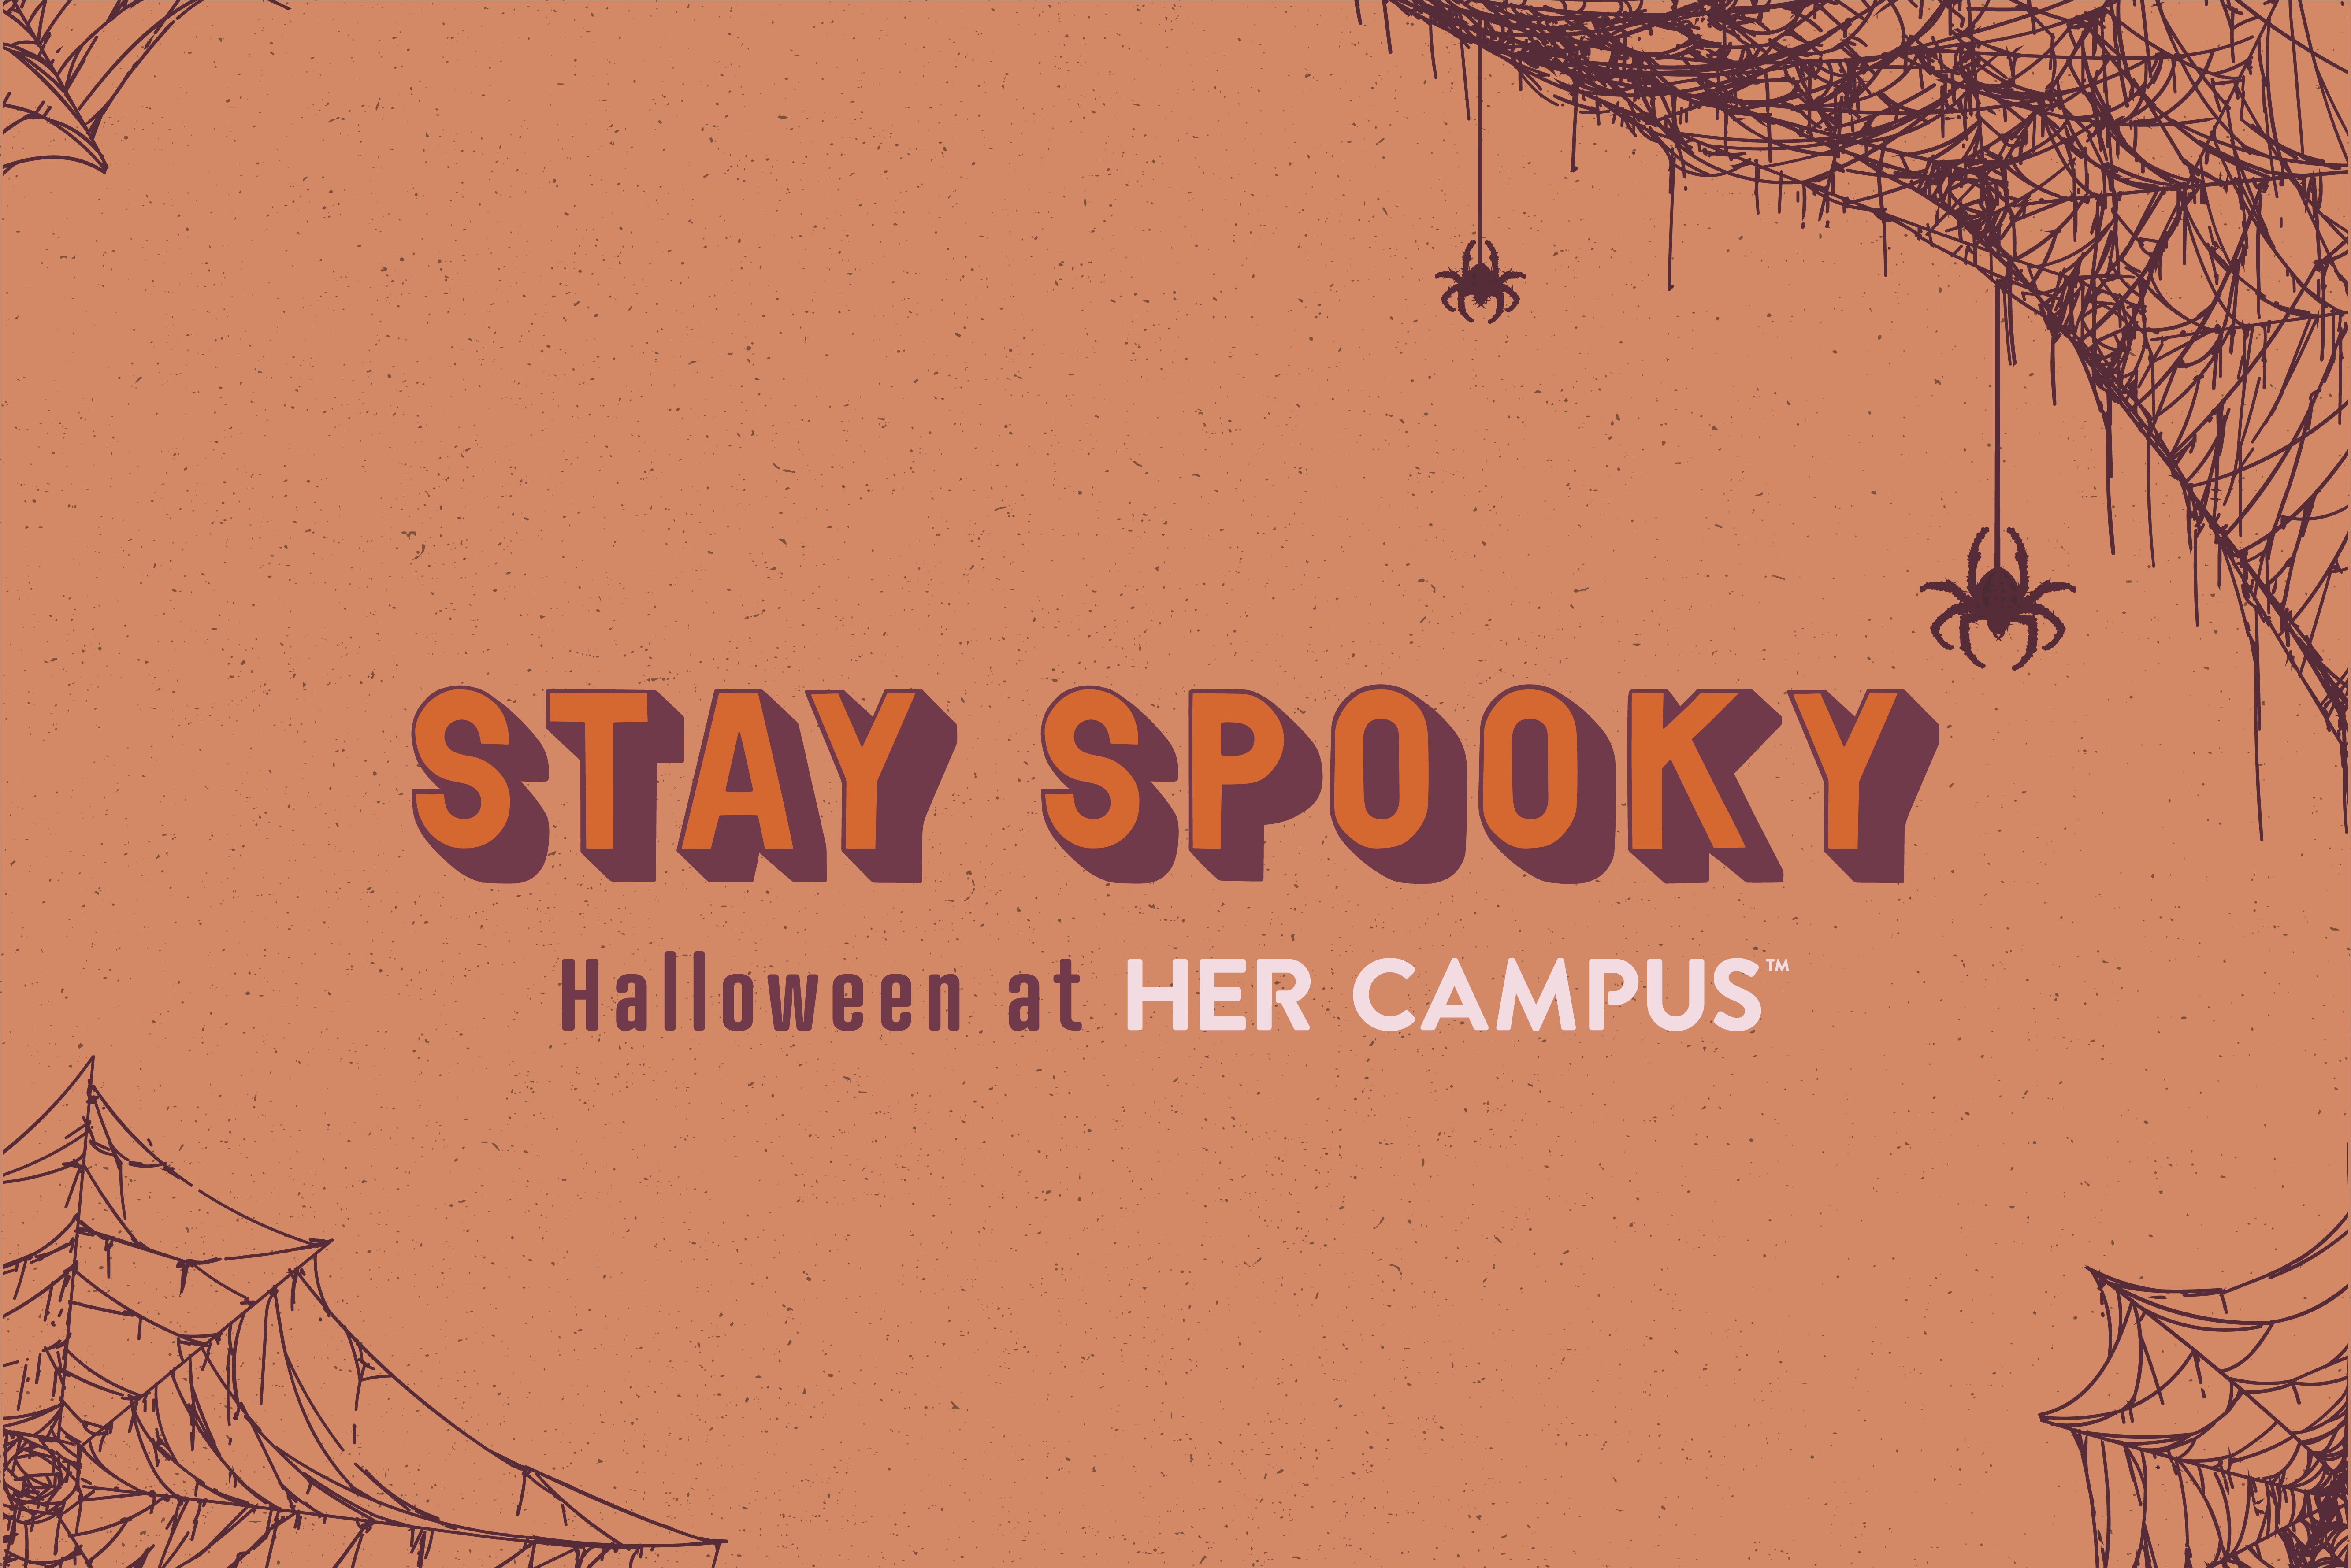 Stay Spooky Halloween at Her Campus